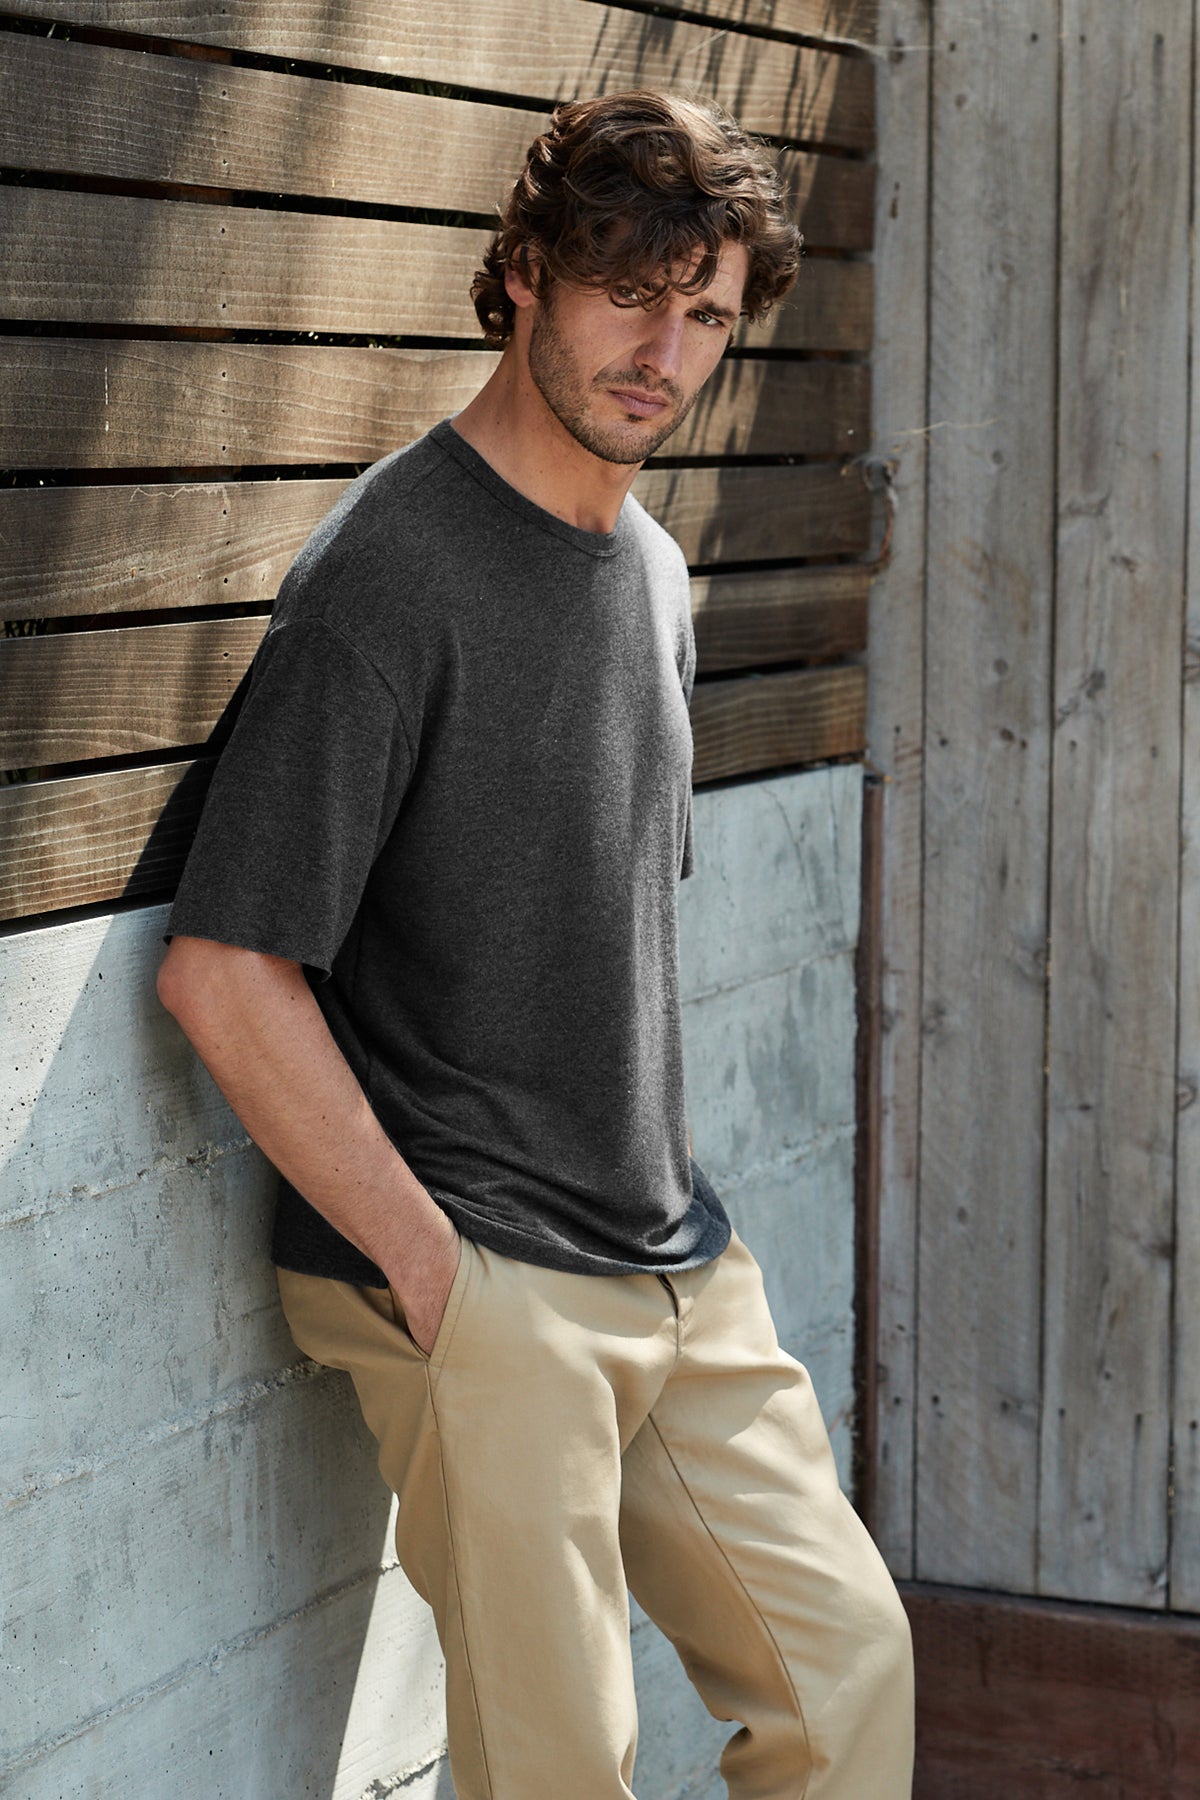 Model leaning against a wall outside with hands in pockets wearing Newall crew neck shirt in dark heathered grey anthracite color.-25084933374145